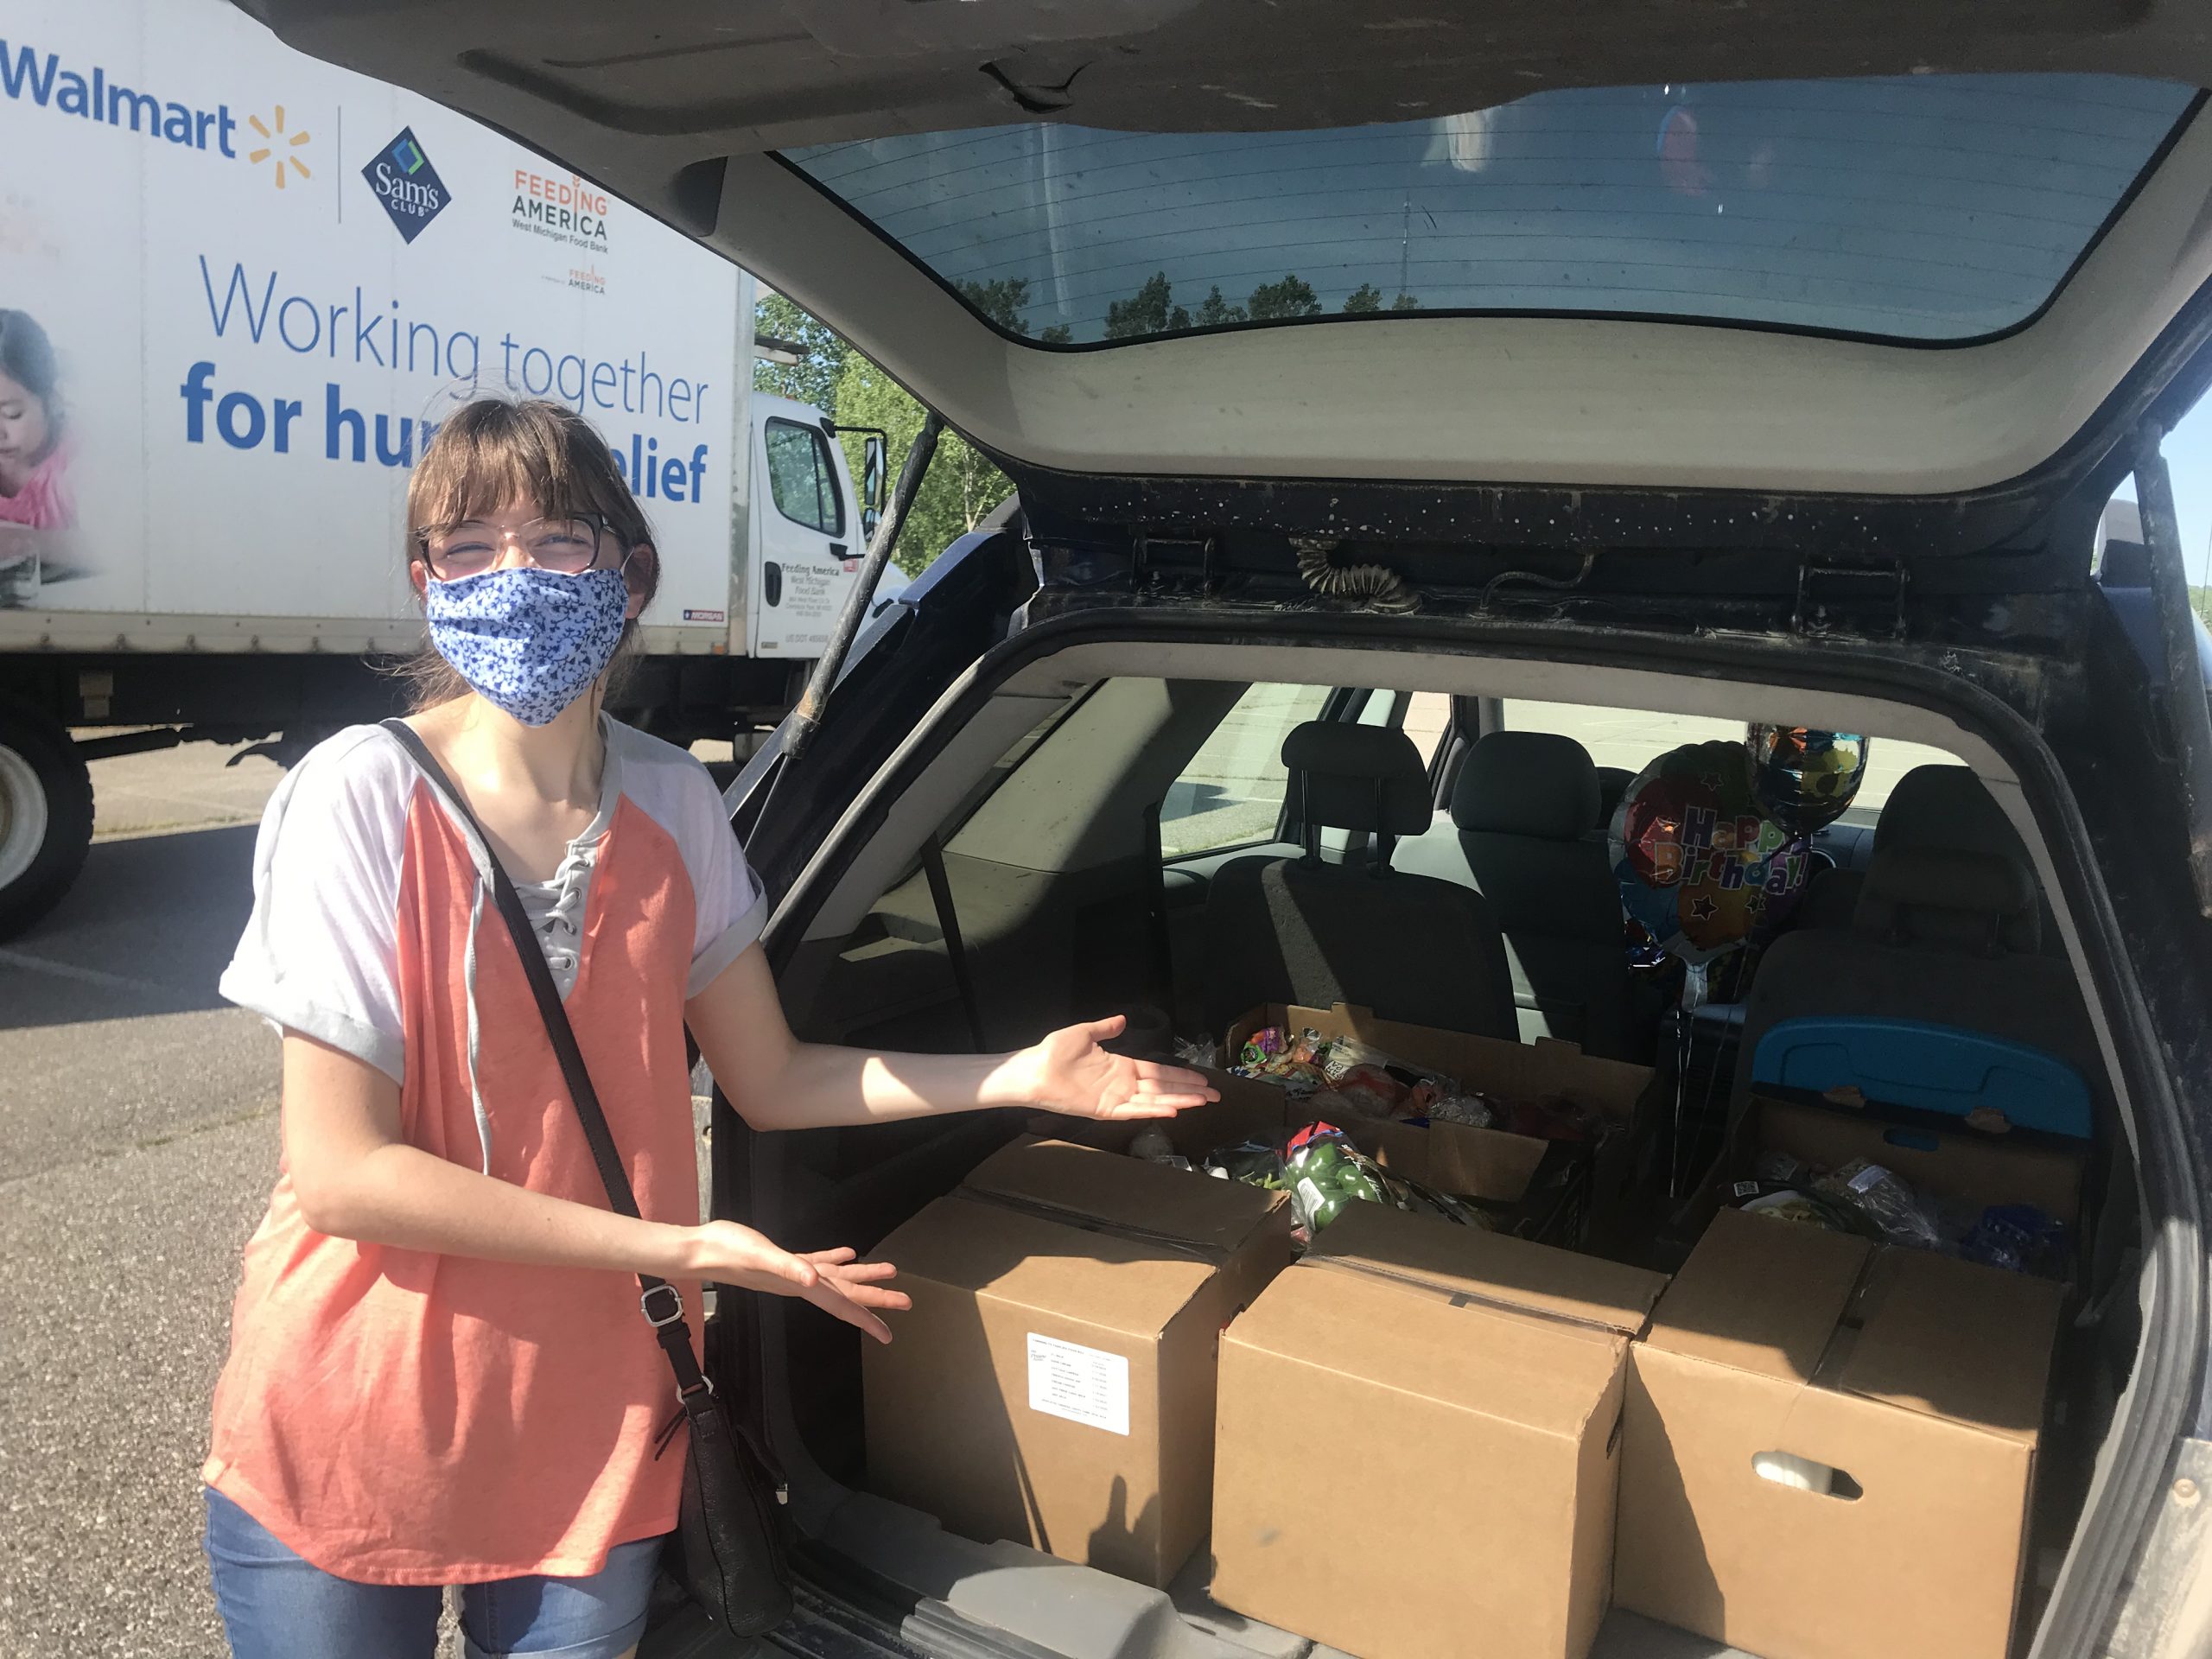 Katie poses with the food she received at the Mobile Pantry